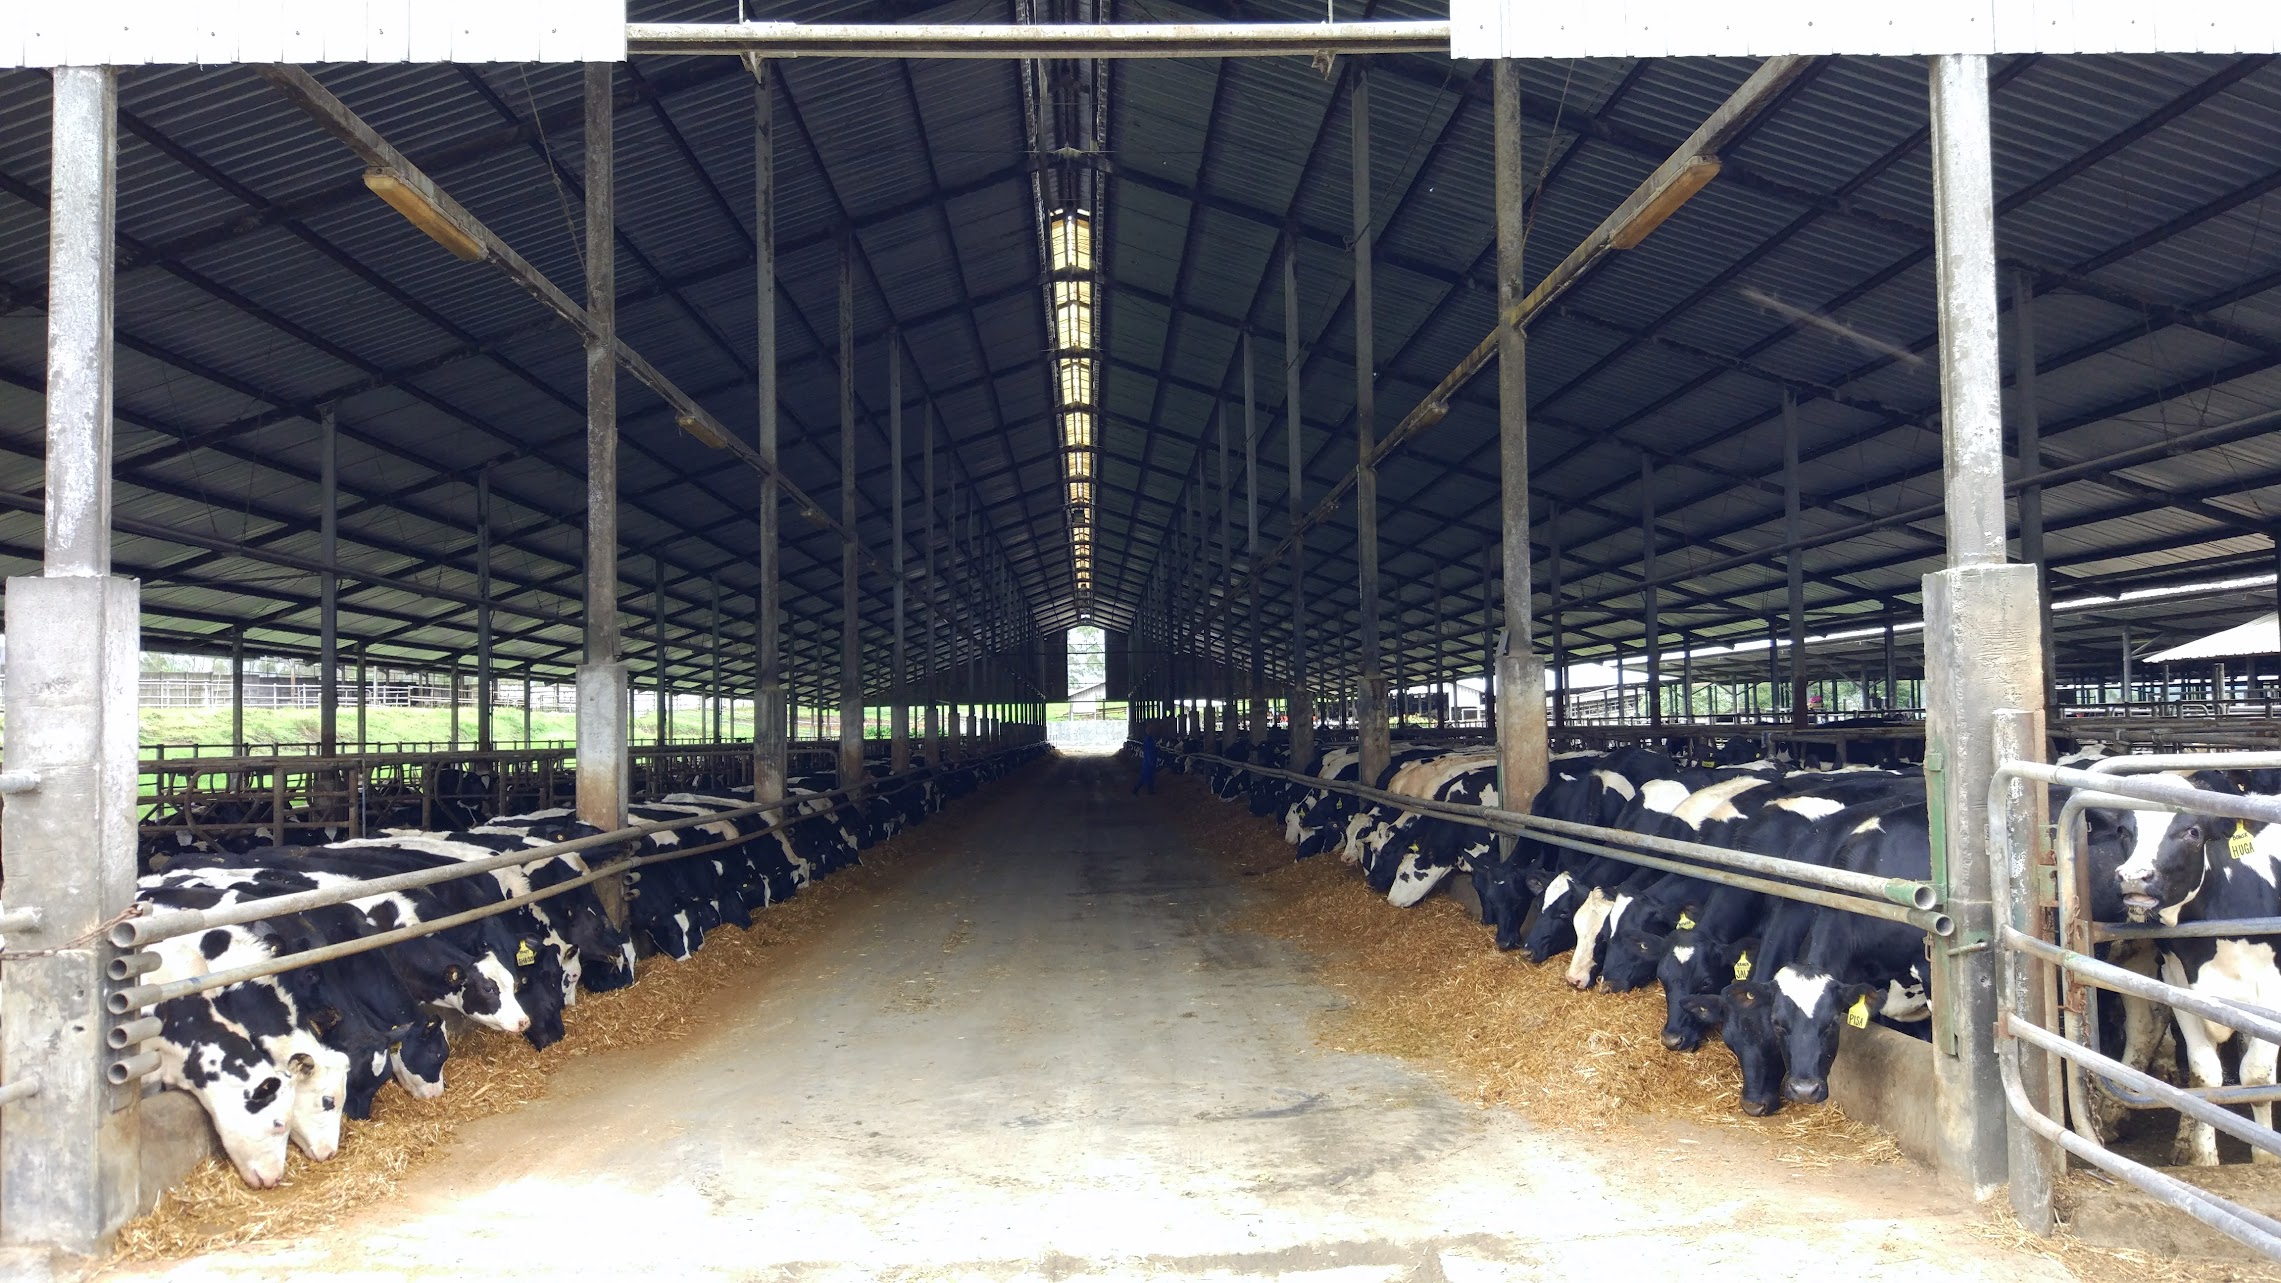 Cattle farm in Pangalengan